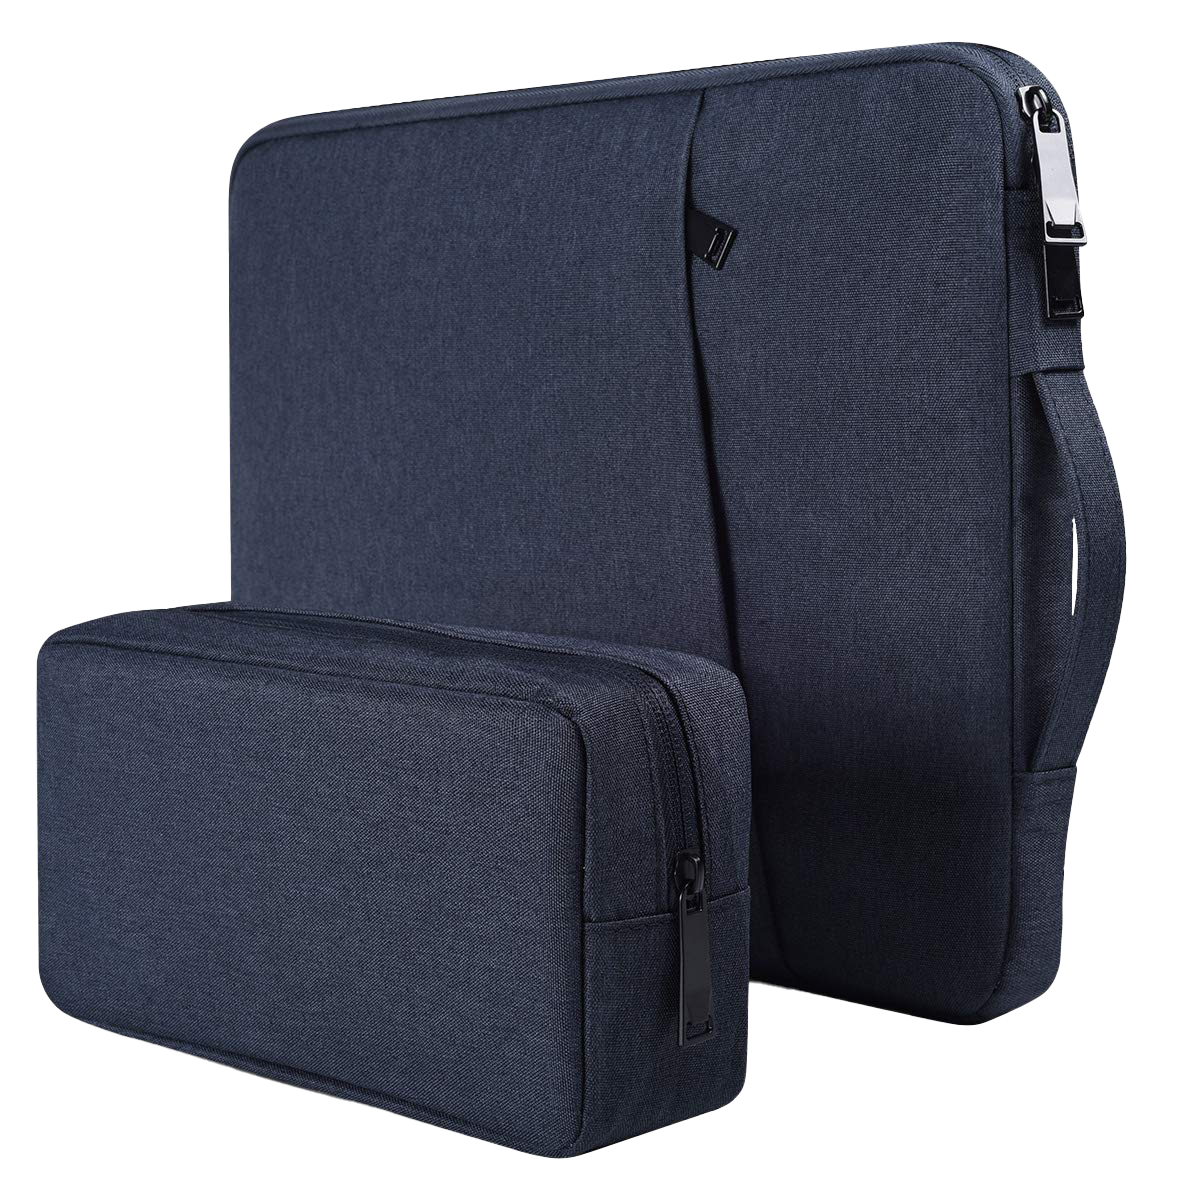 Dealcase 15.6-inch Laptop Sleeve and pouch